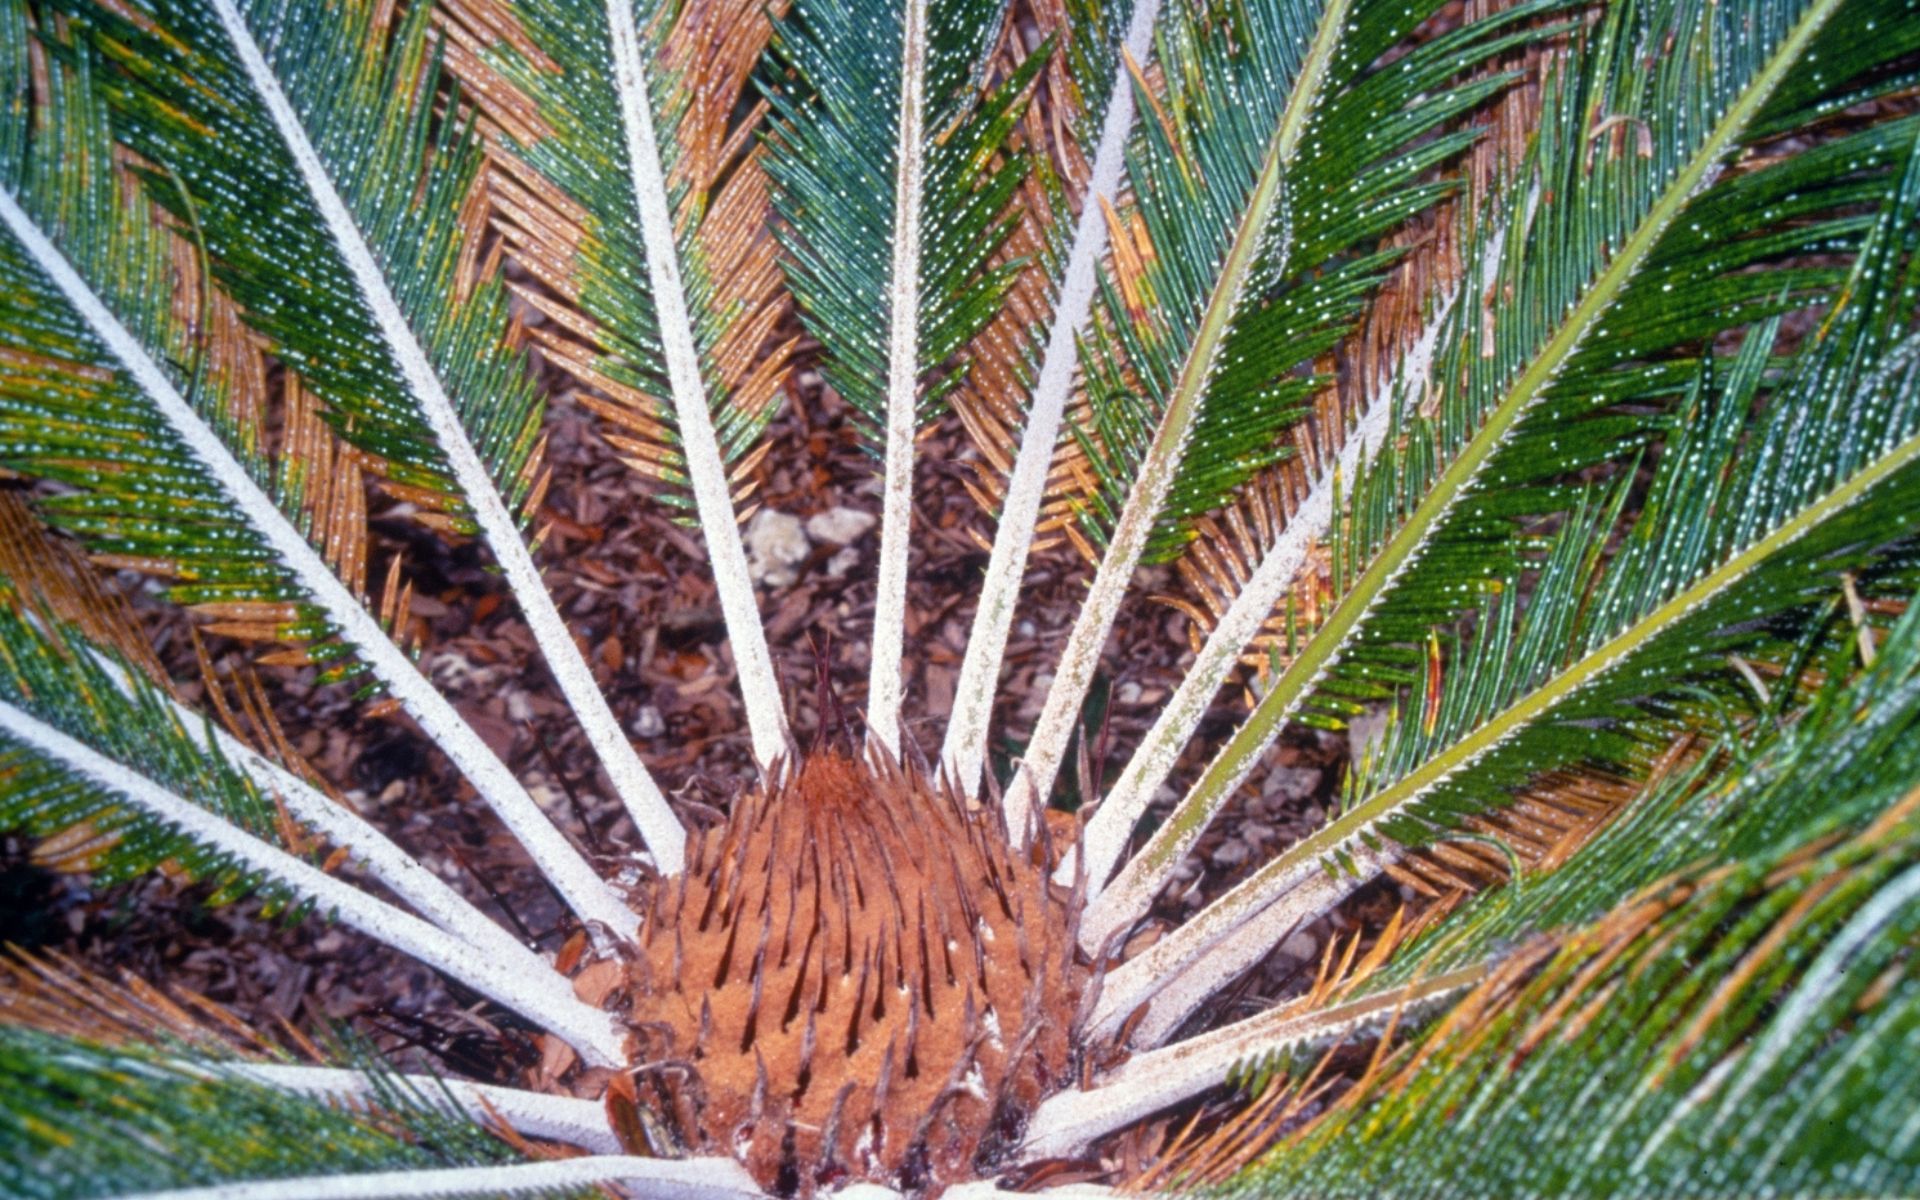 Symptoms of cycad aulacaspis scale on a palm in Florida.